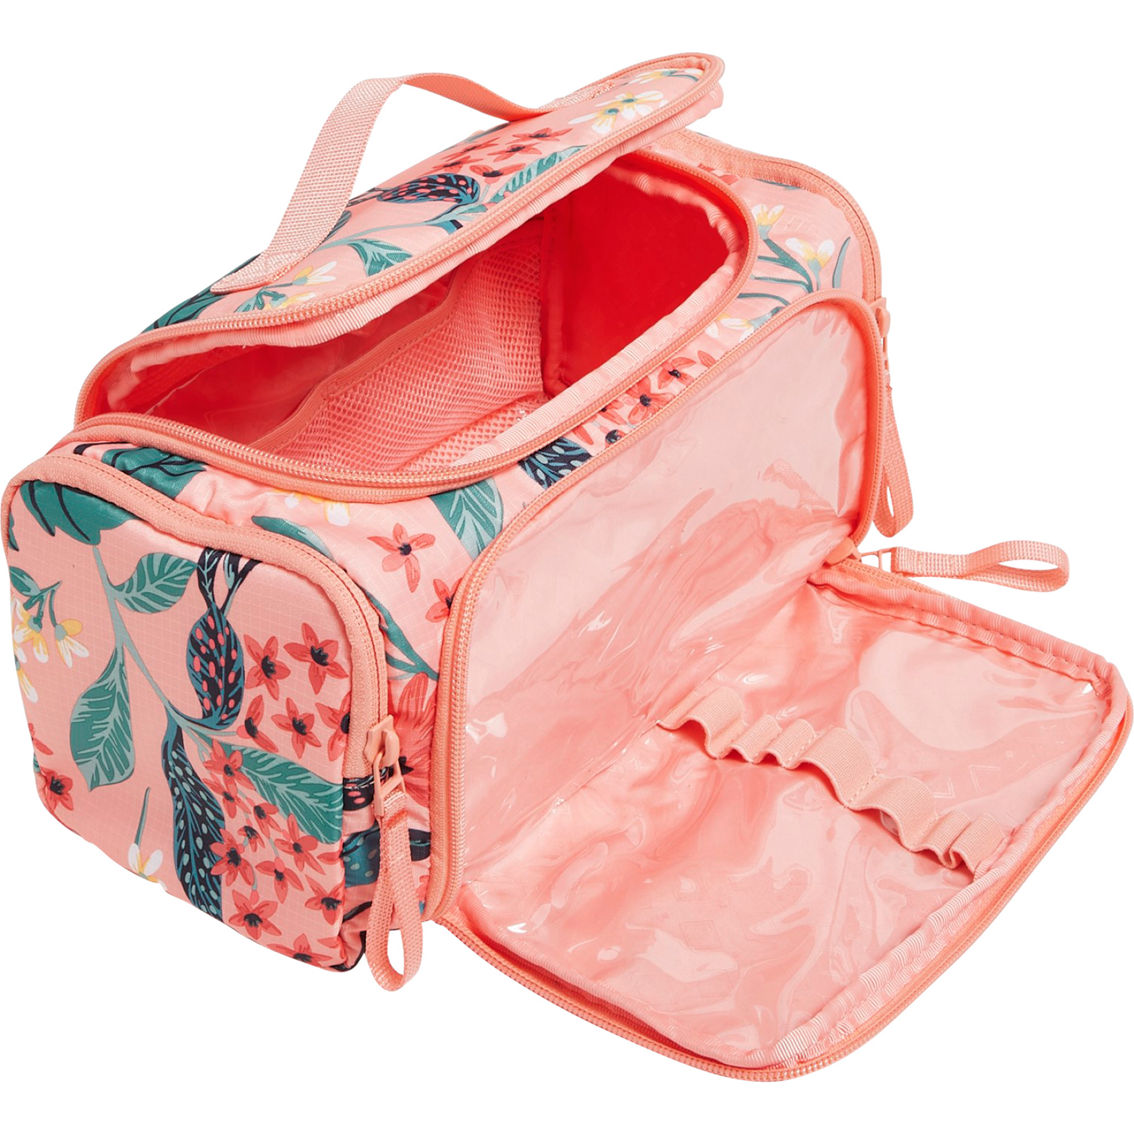 Vera Bradley Large Travel Cosmetic, Paradise Bright Coral - Image 3 of 3